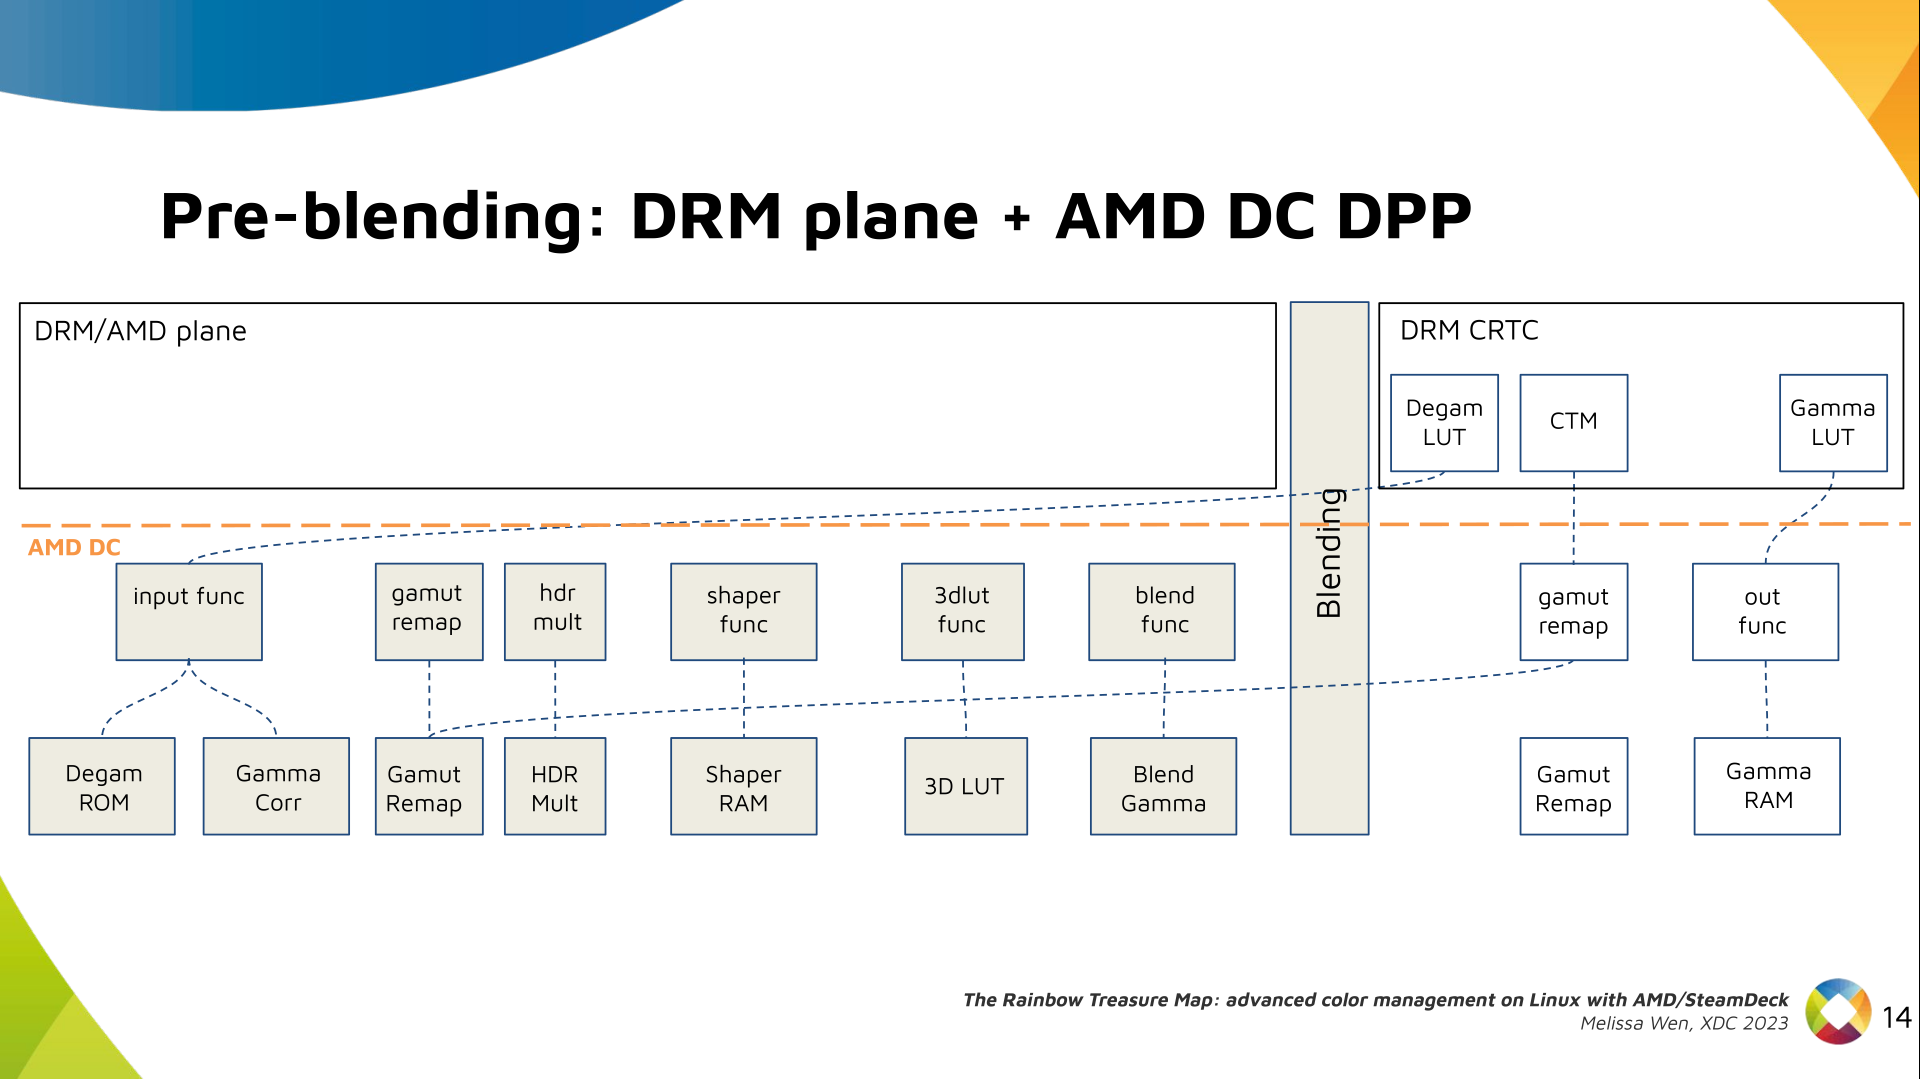 Slide 13: Previous Diagram with a rectangle to highlight the empty space in the DRM plane interface that will be filled by AMD plane properties